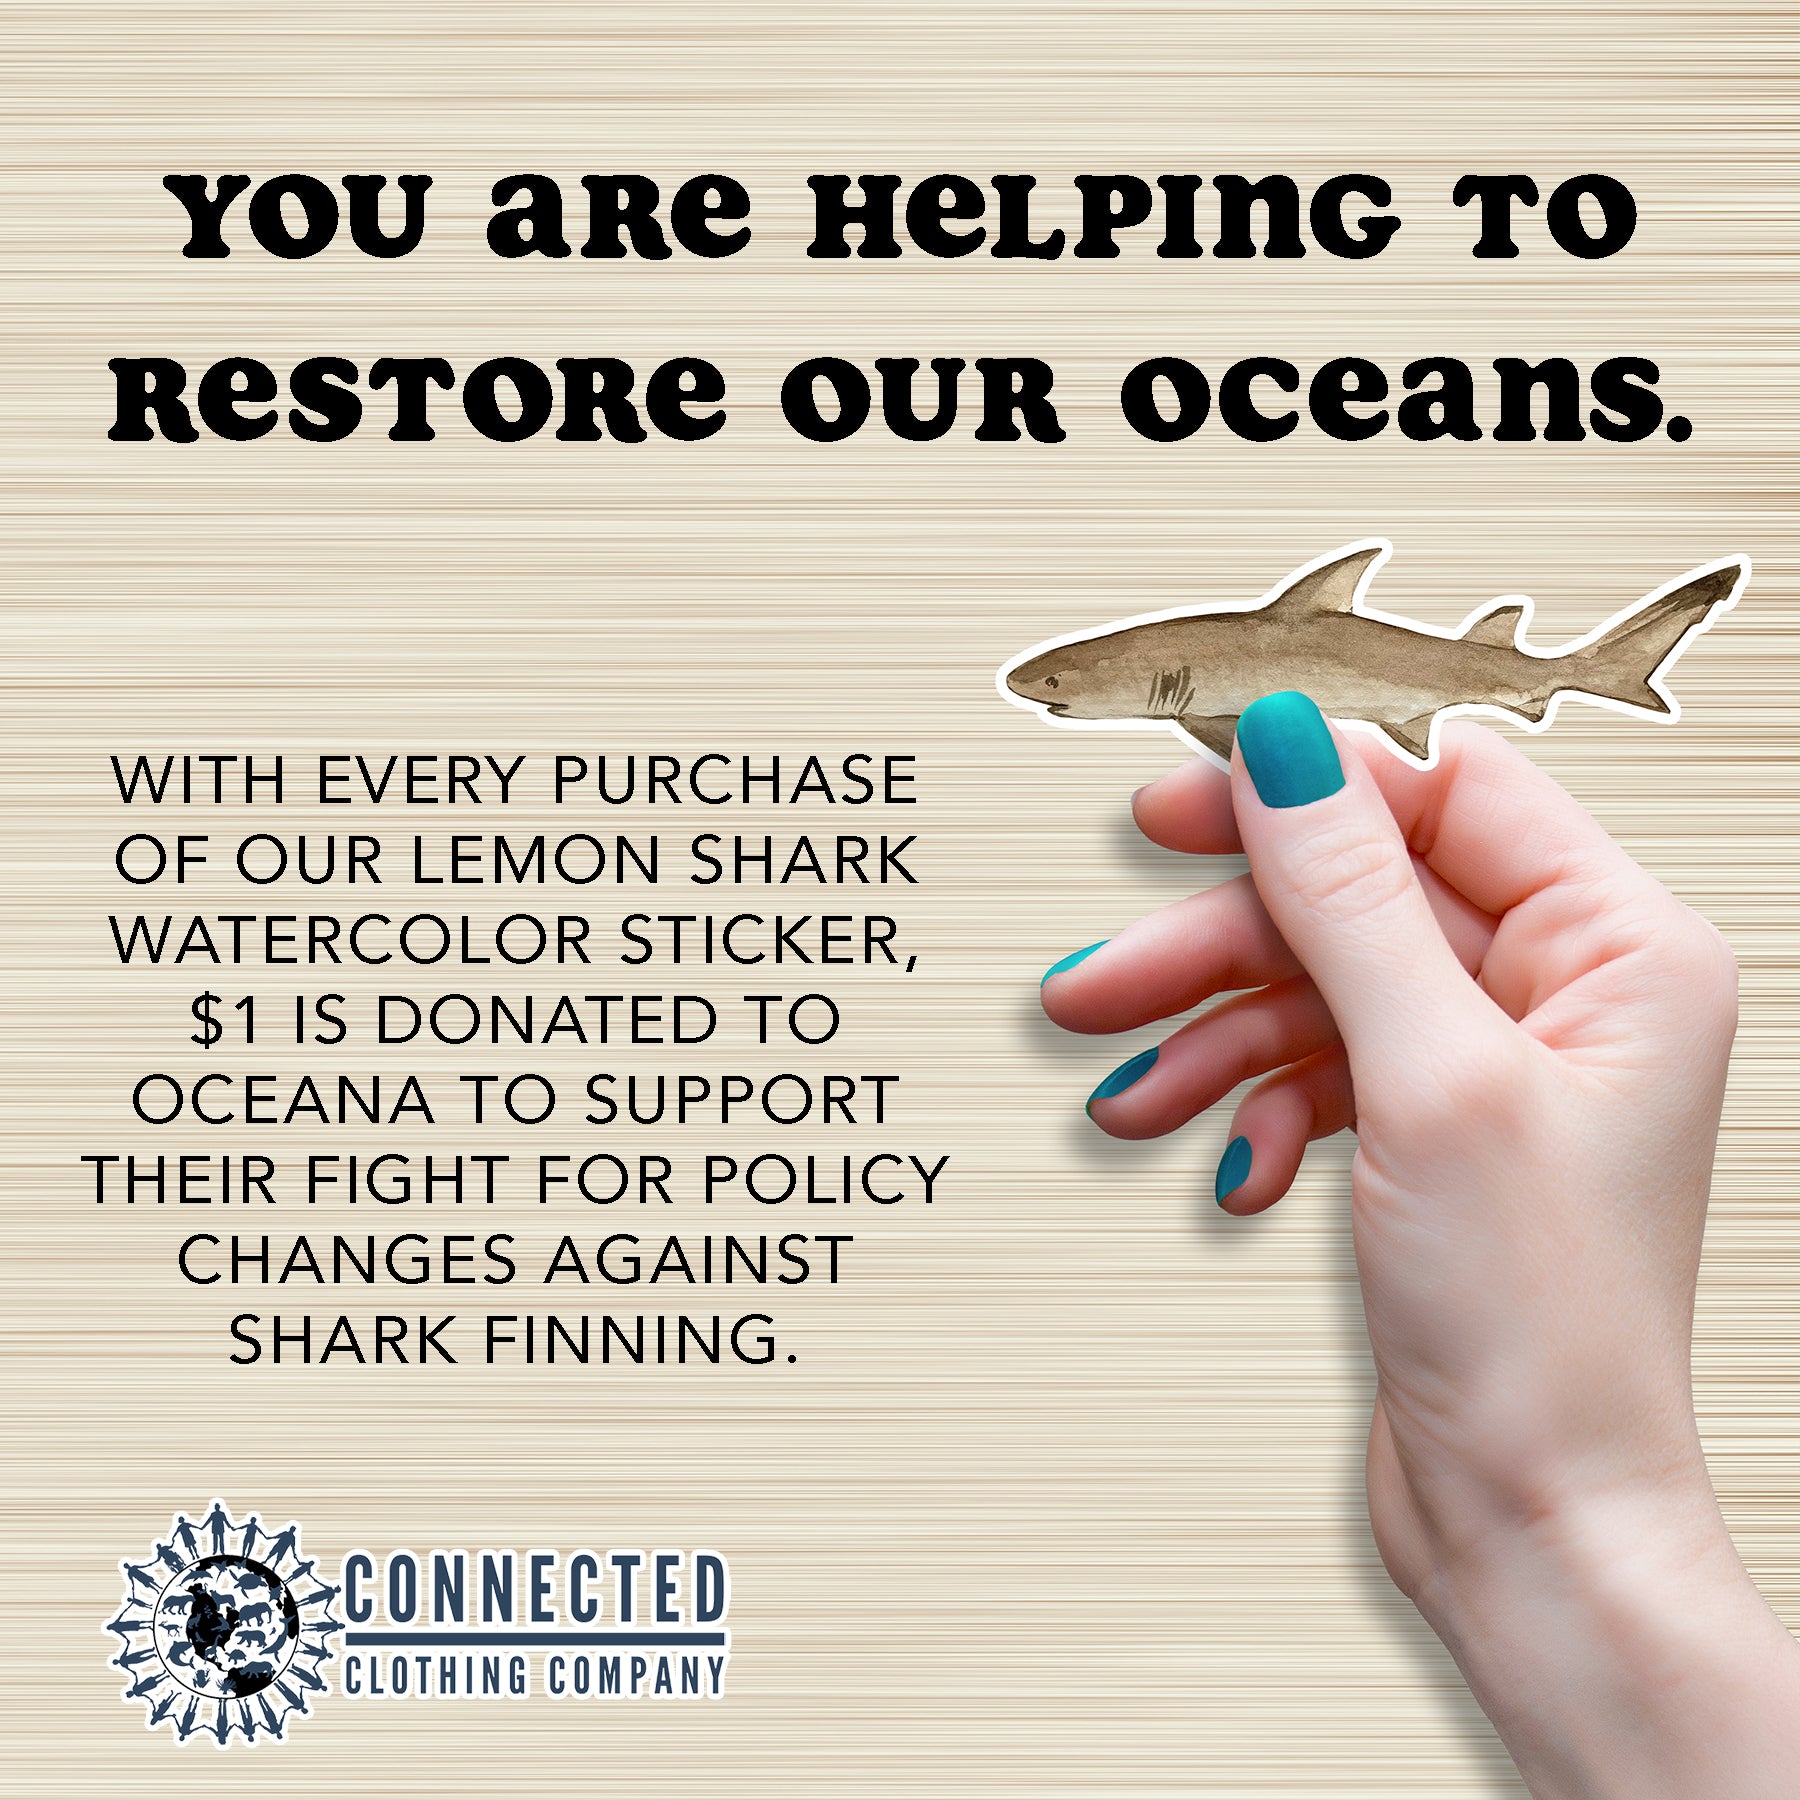 Hand Holding Lemon Shark Watercolor Sticker - "You are helping to restore our oceans. With every purchase of our lemon shark watercolor sticker, $1 is donated to oceana to support their fight for policy changes against shark finning." - Connected Clothing Company - Ethical and Sustainable Apparel - portion of profits donated to shark conservation